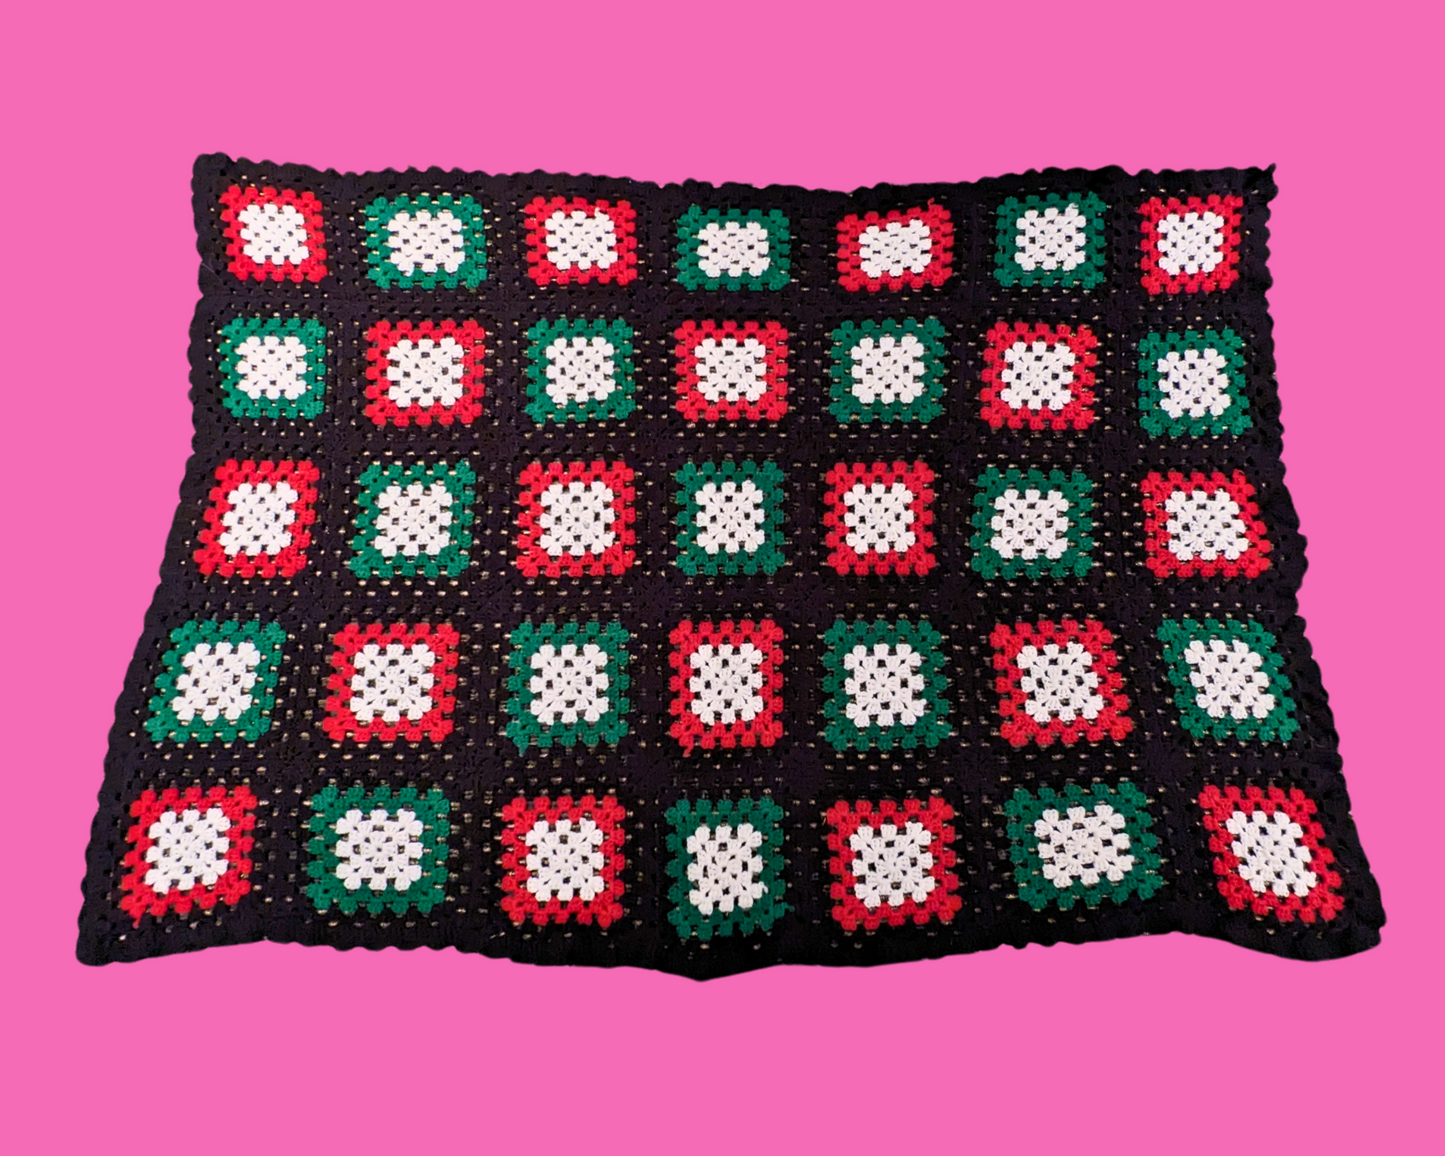 Vintage 1980's Black, White, Green and Red Wool Crochet Blanket